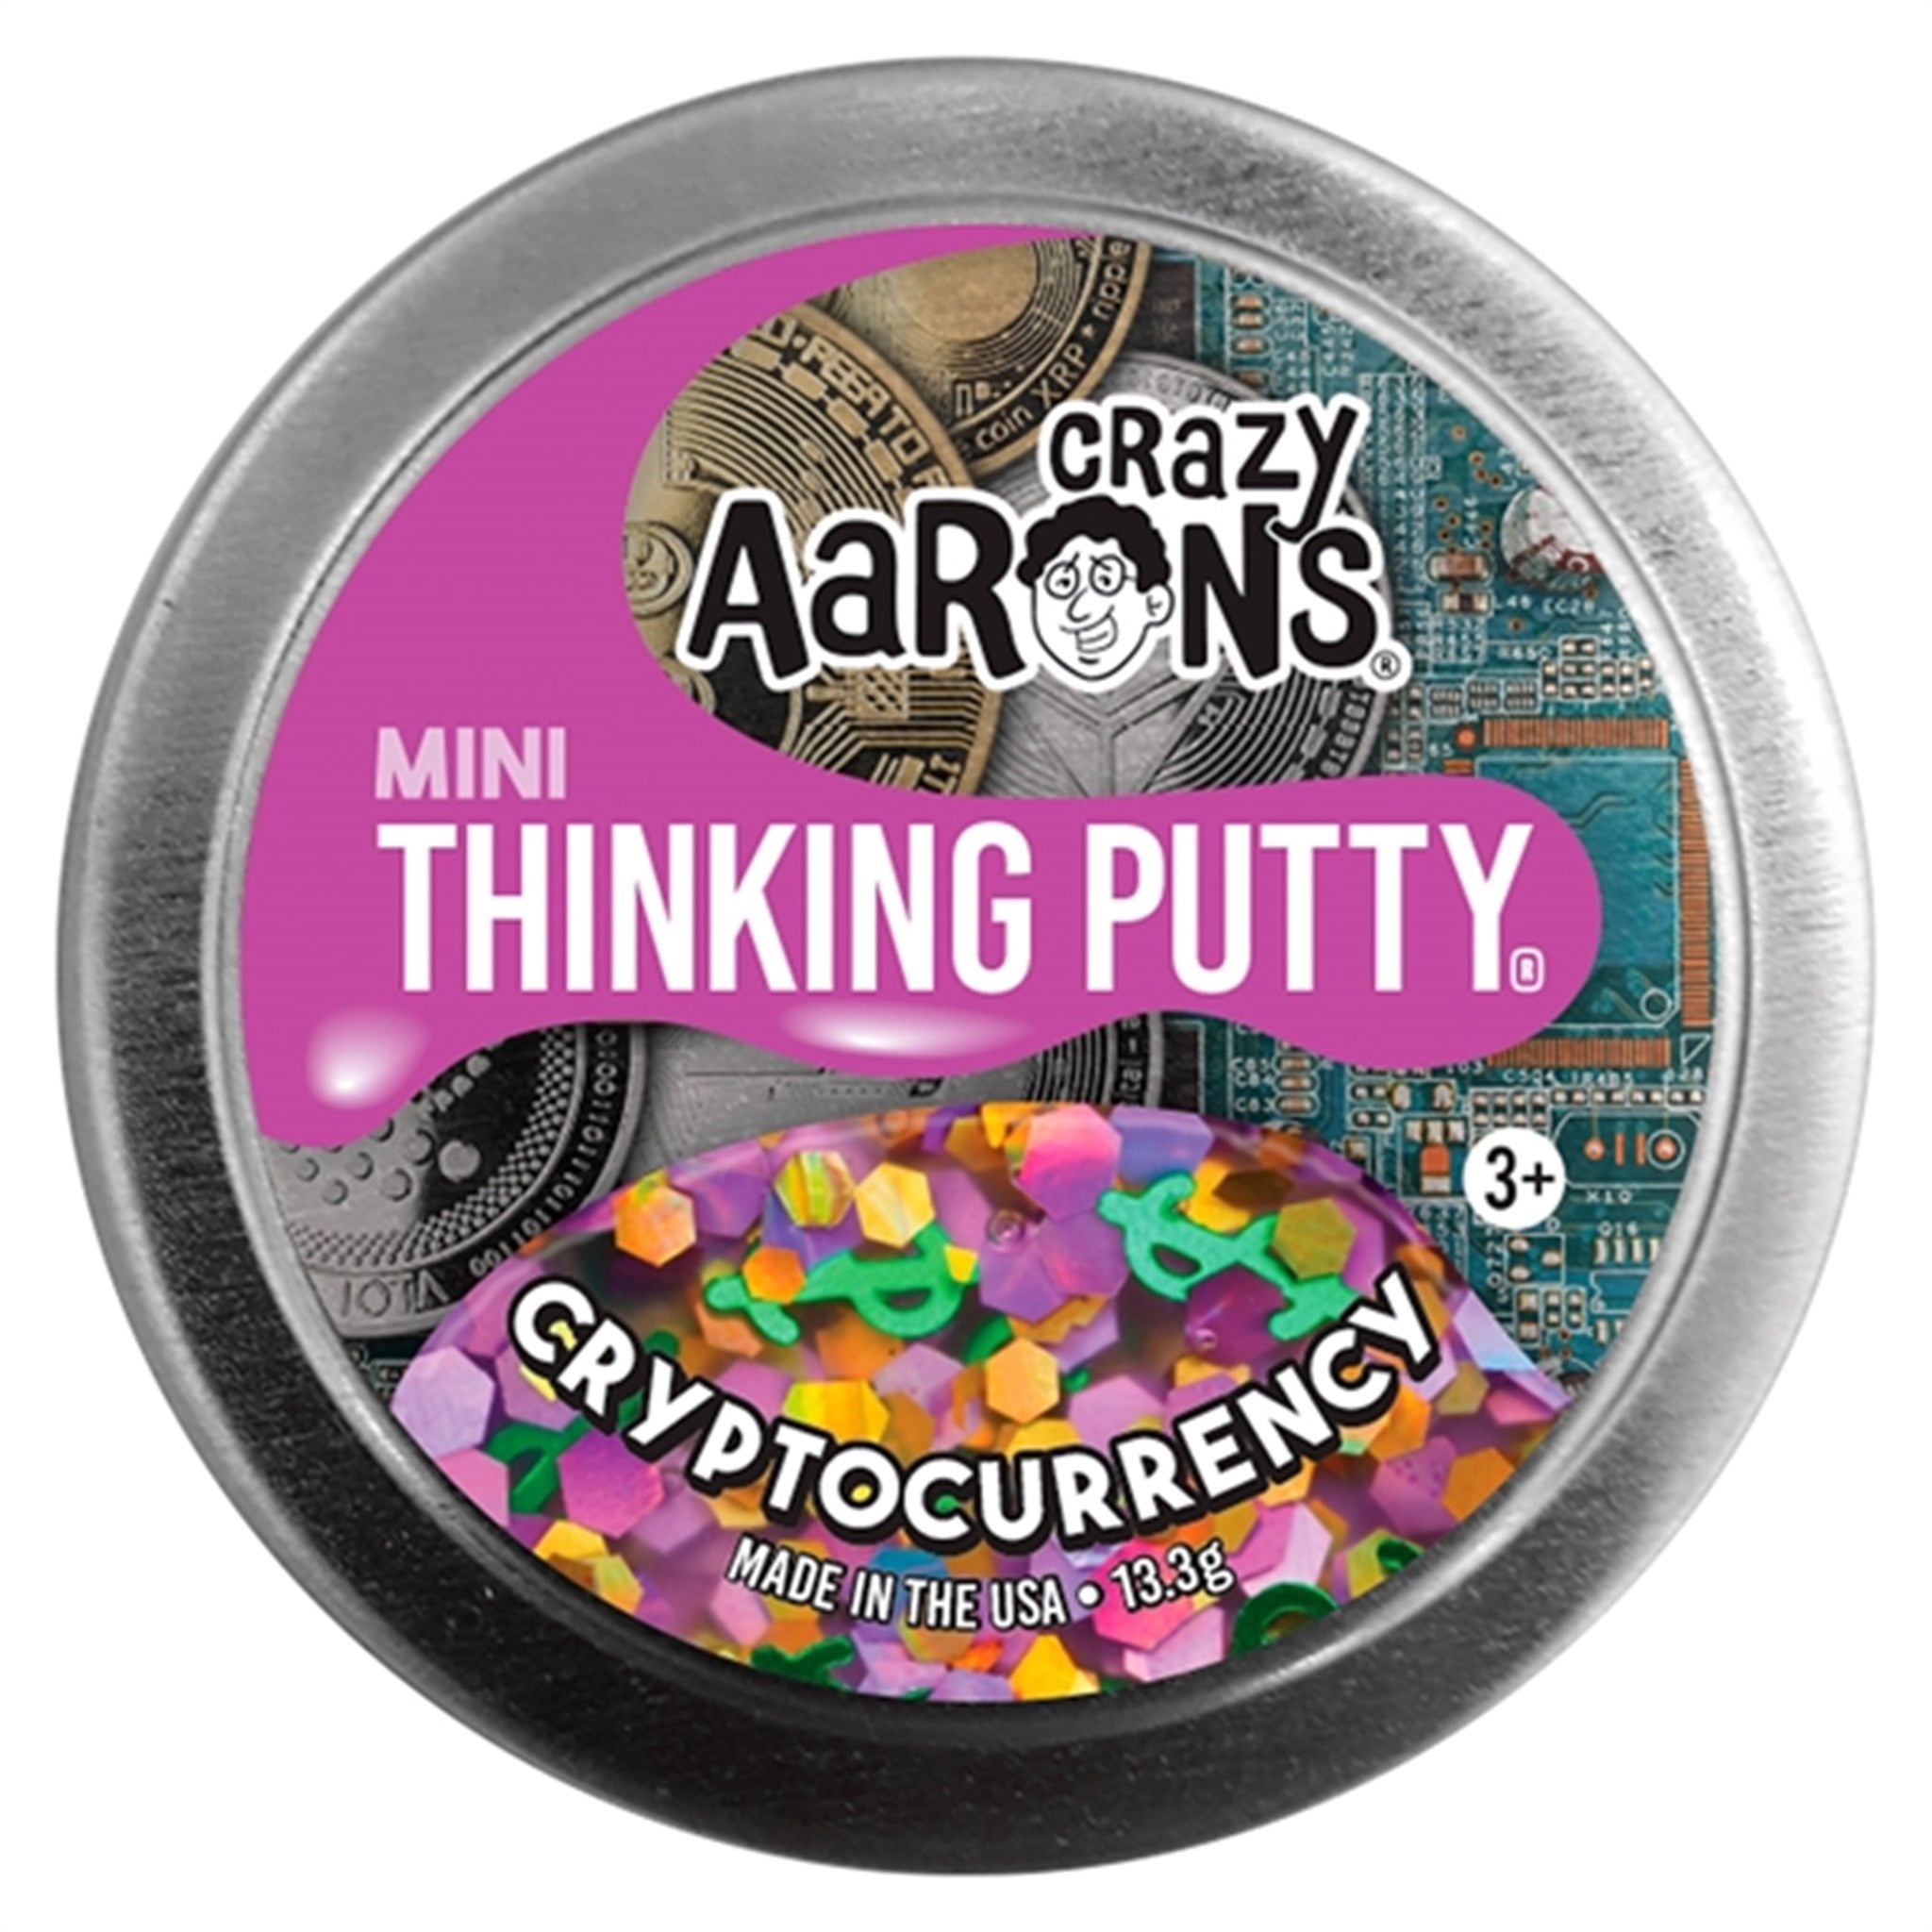 Crazy Aaron's® Thinking Putty Mini Tins - Crytocurrency